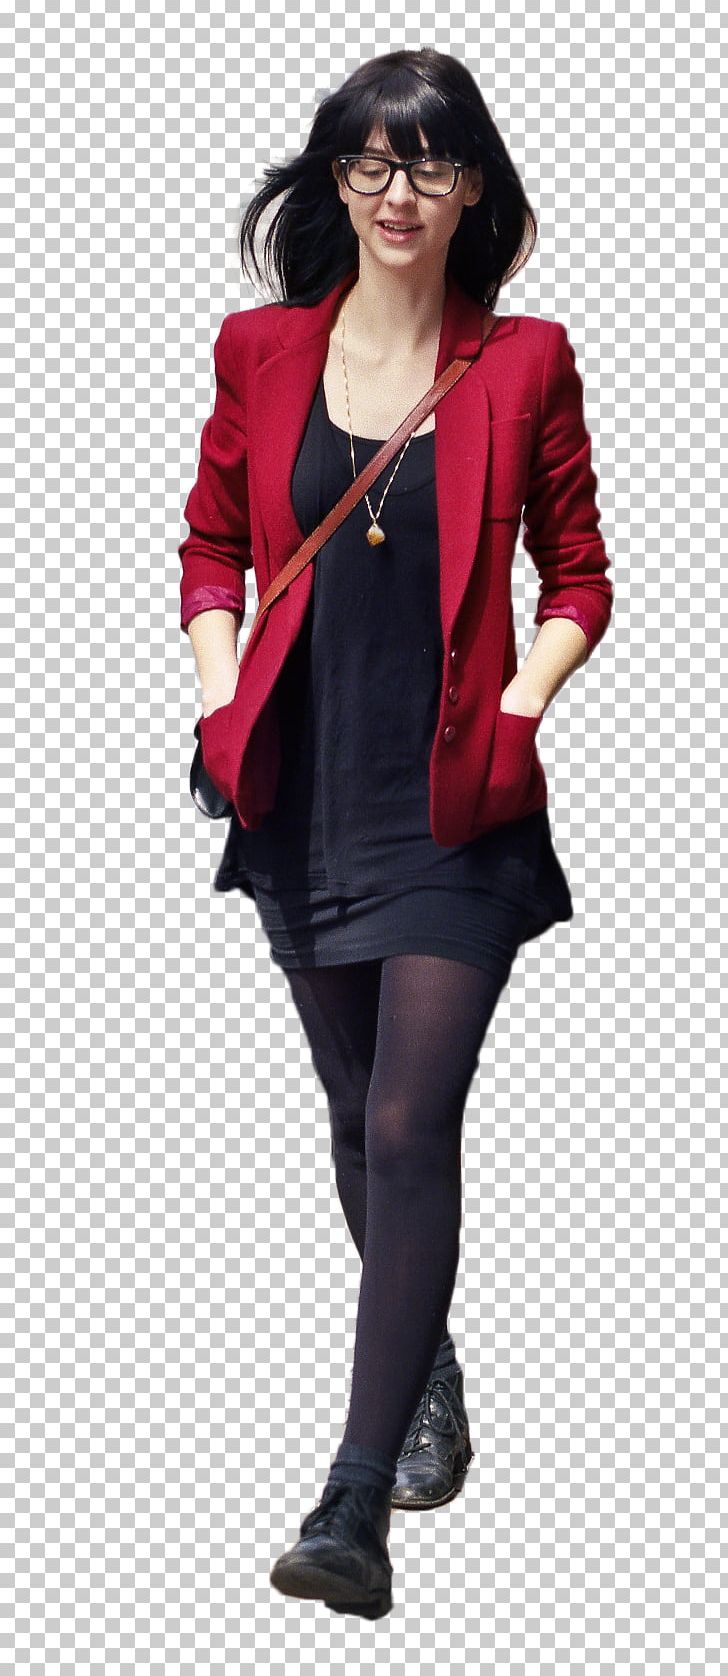 Woman Walking PNG, Clipart, Amp, Architecture, Blazer, Clothing, Cutout Free PNG Download